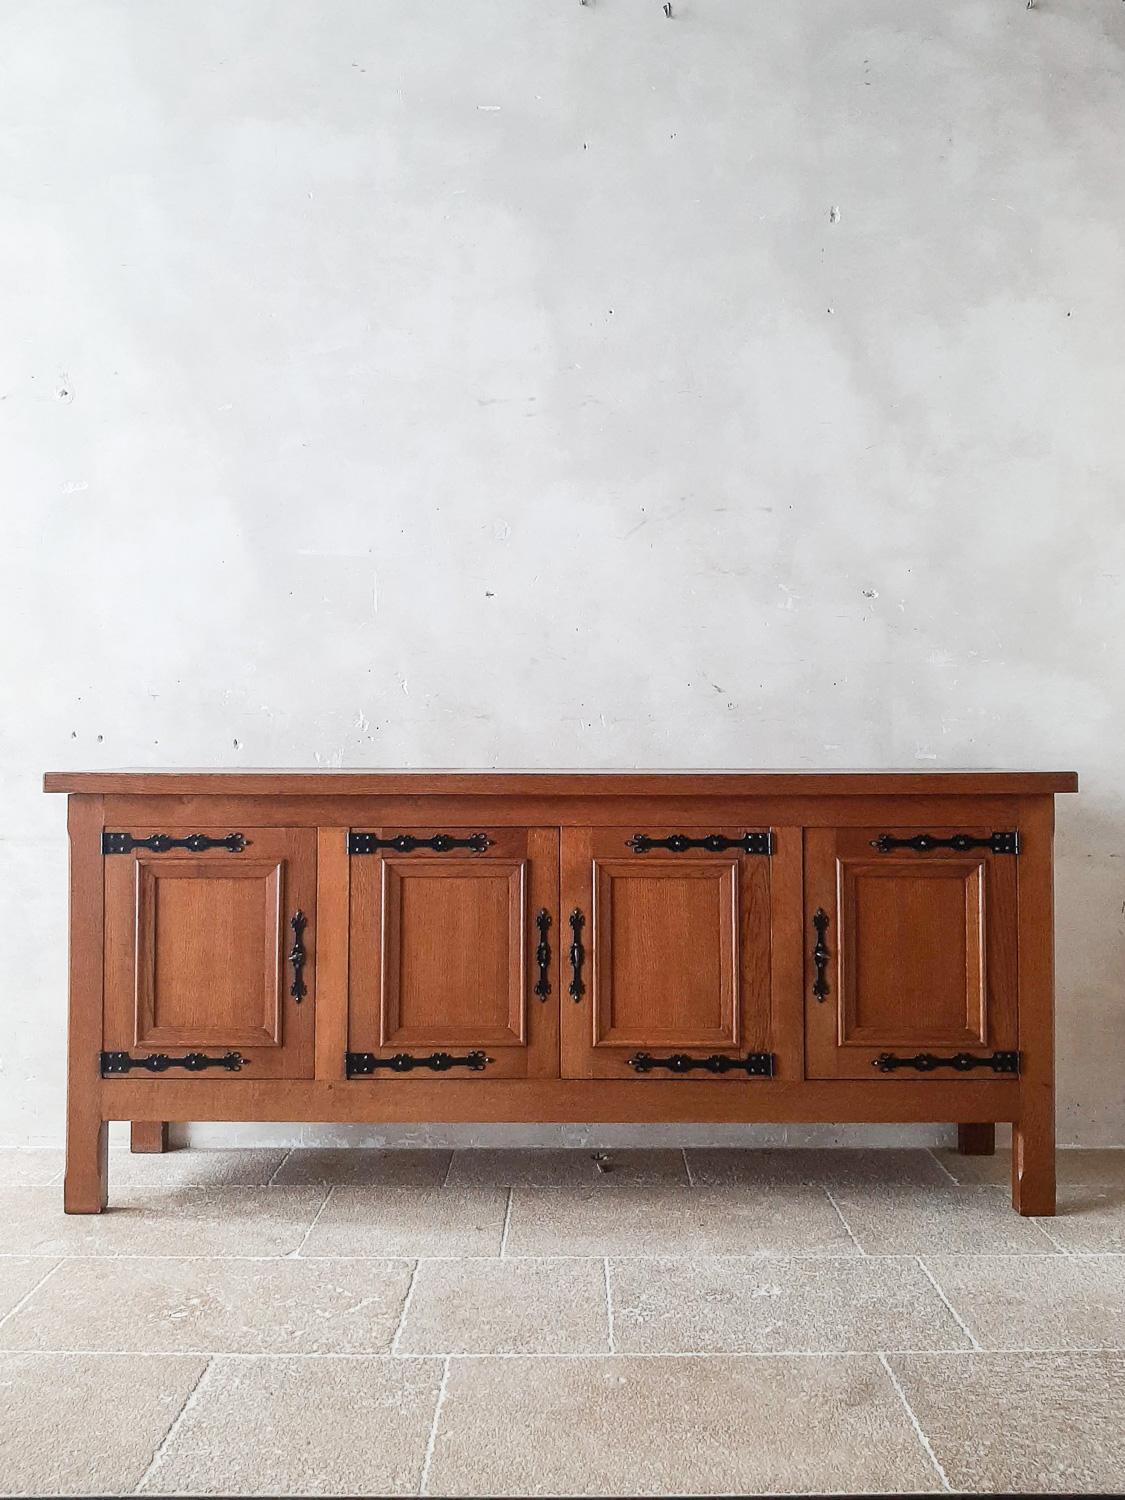 Mid-century Spanish oak credenza. Beautiful Spanish colonial style solid oak sideboard. With four panelled doors and large wrought iron hinges and locks. Behind the four doors a large compartment with a full lenght shelve and two drawers in the